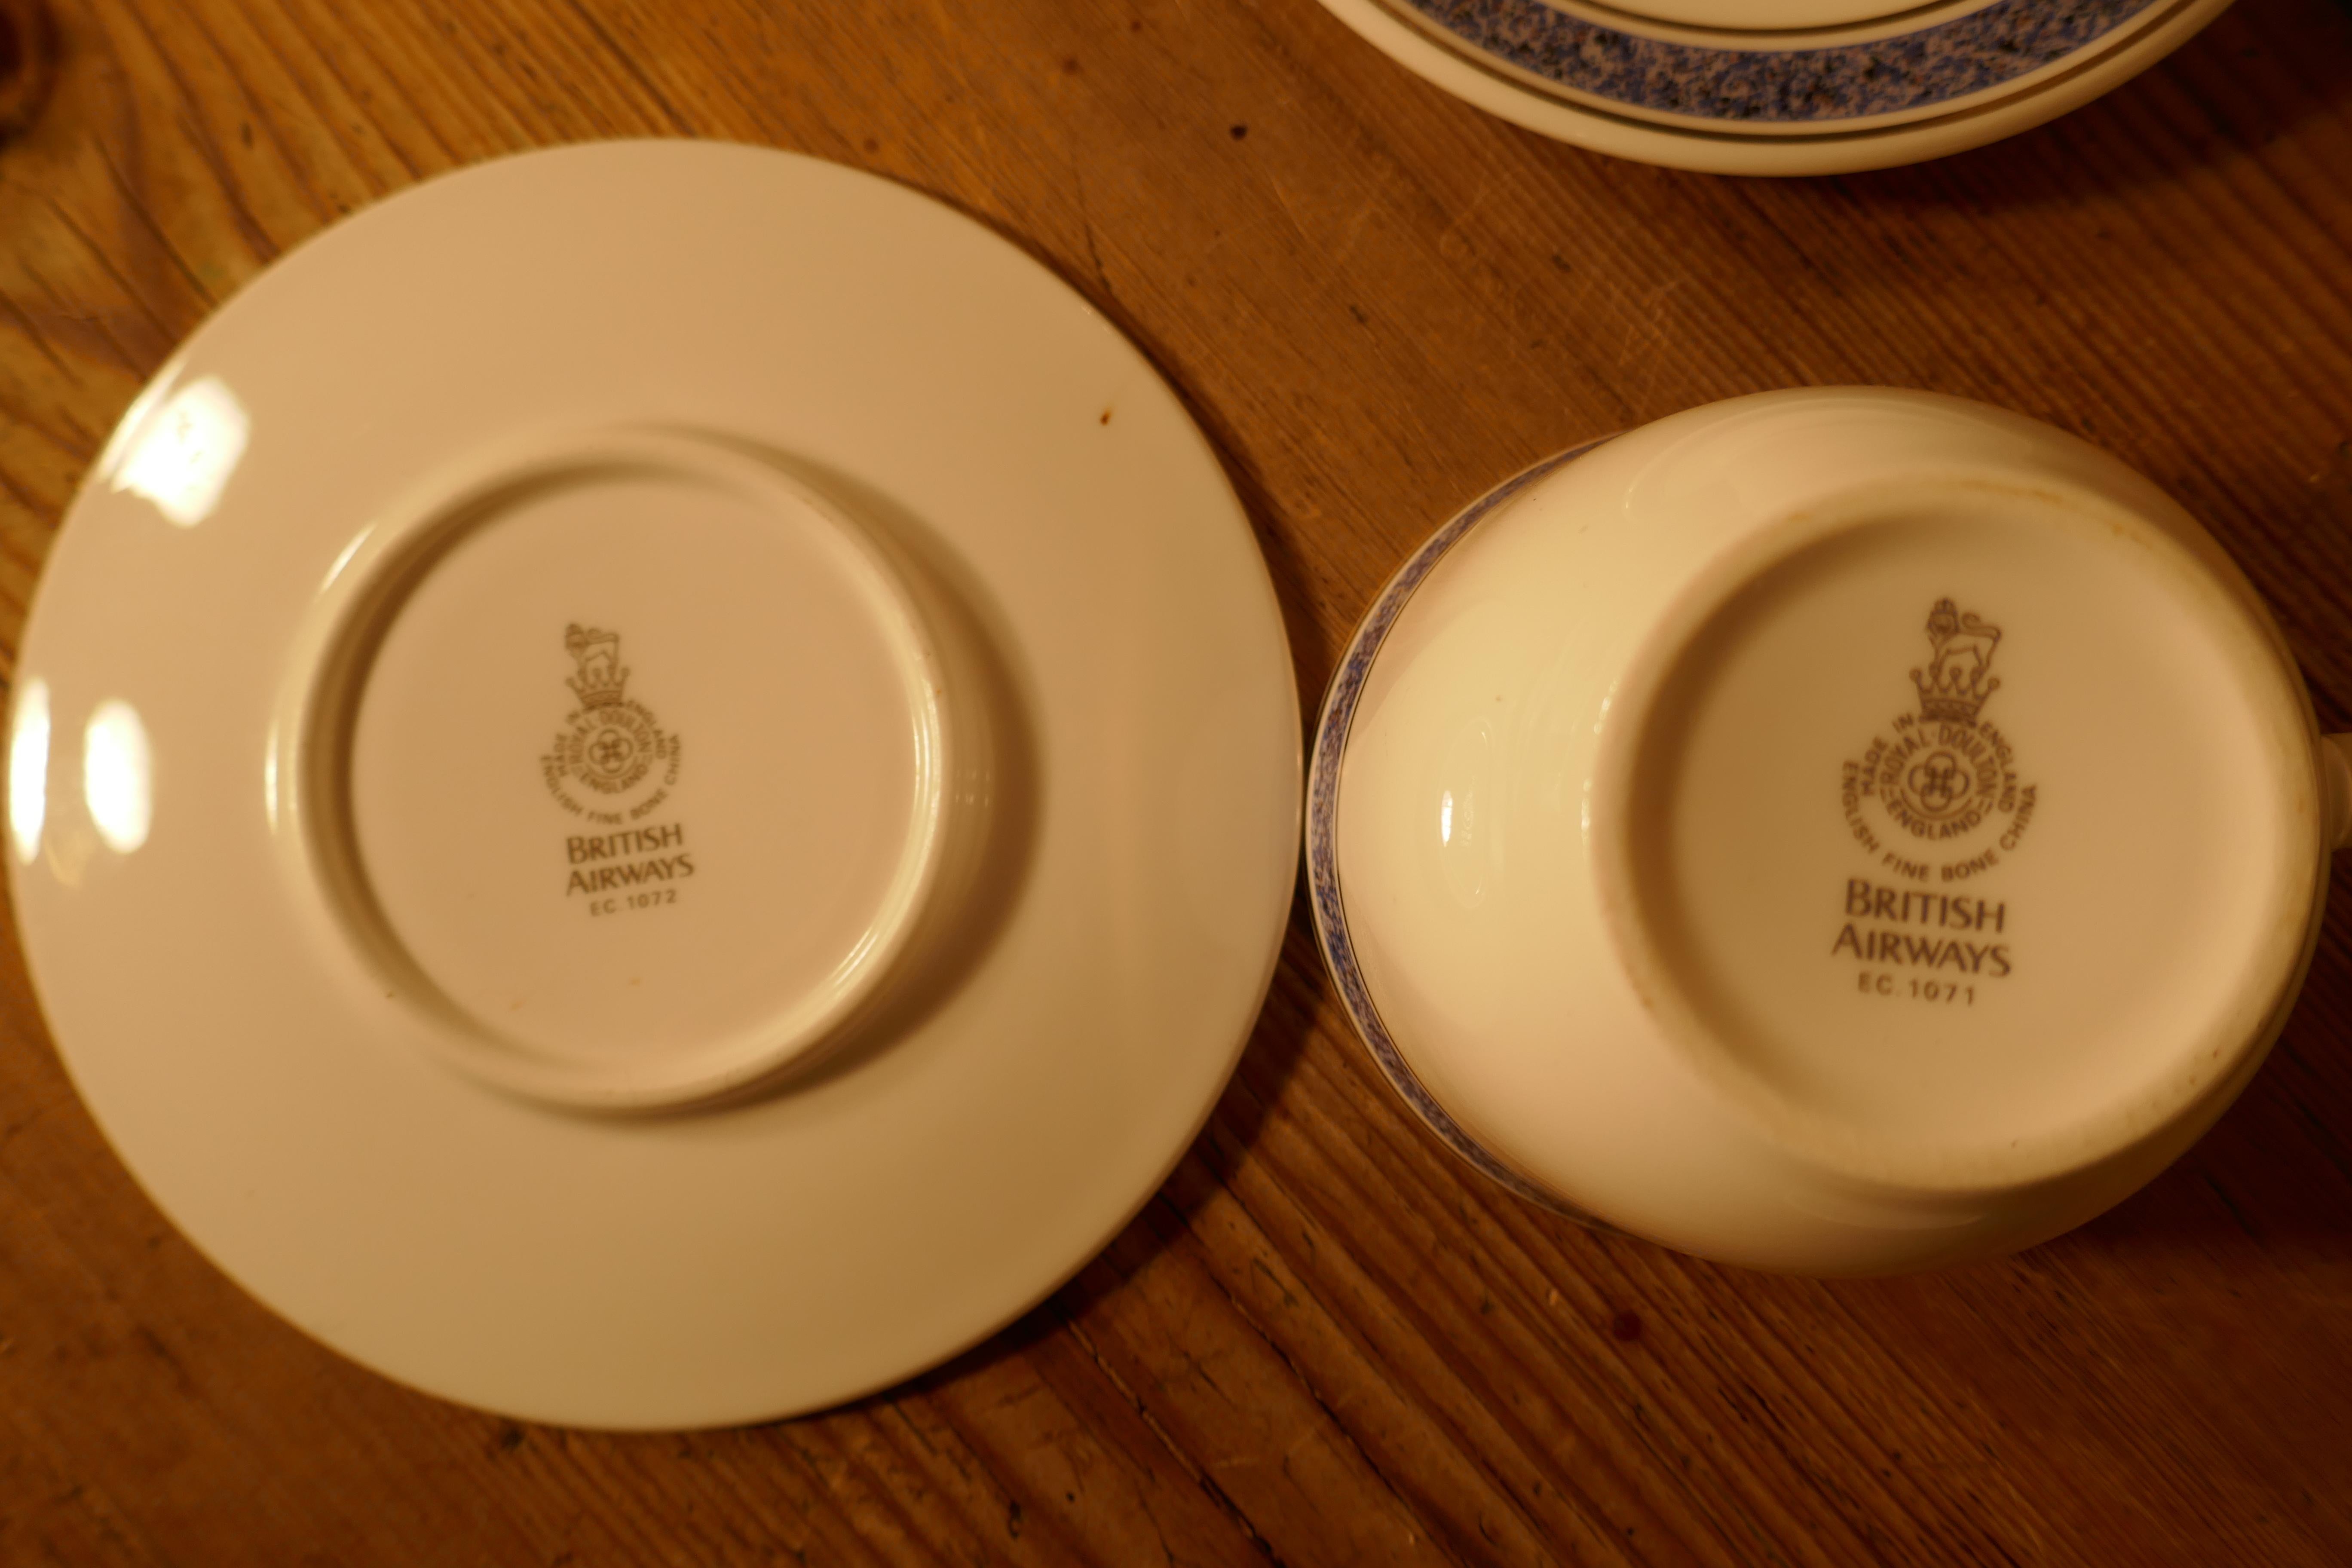 20th Century British Airways Royal Doulton, Cups and Saucers 